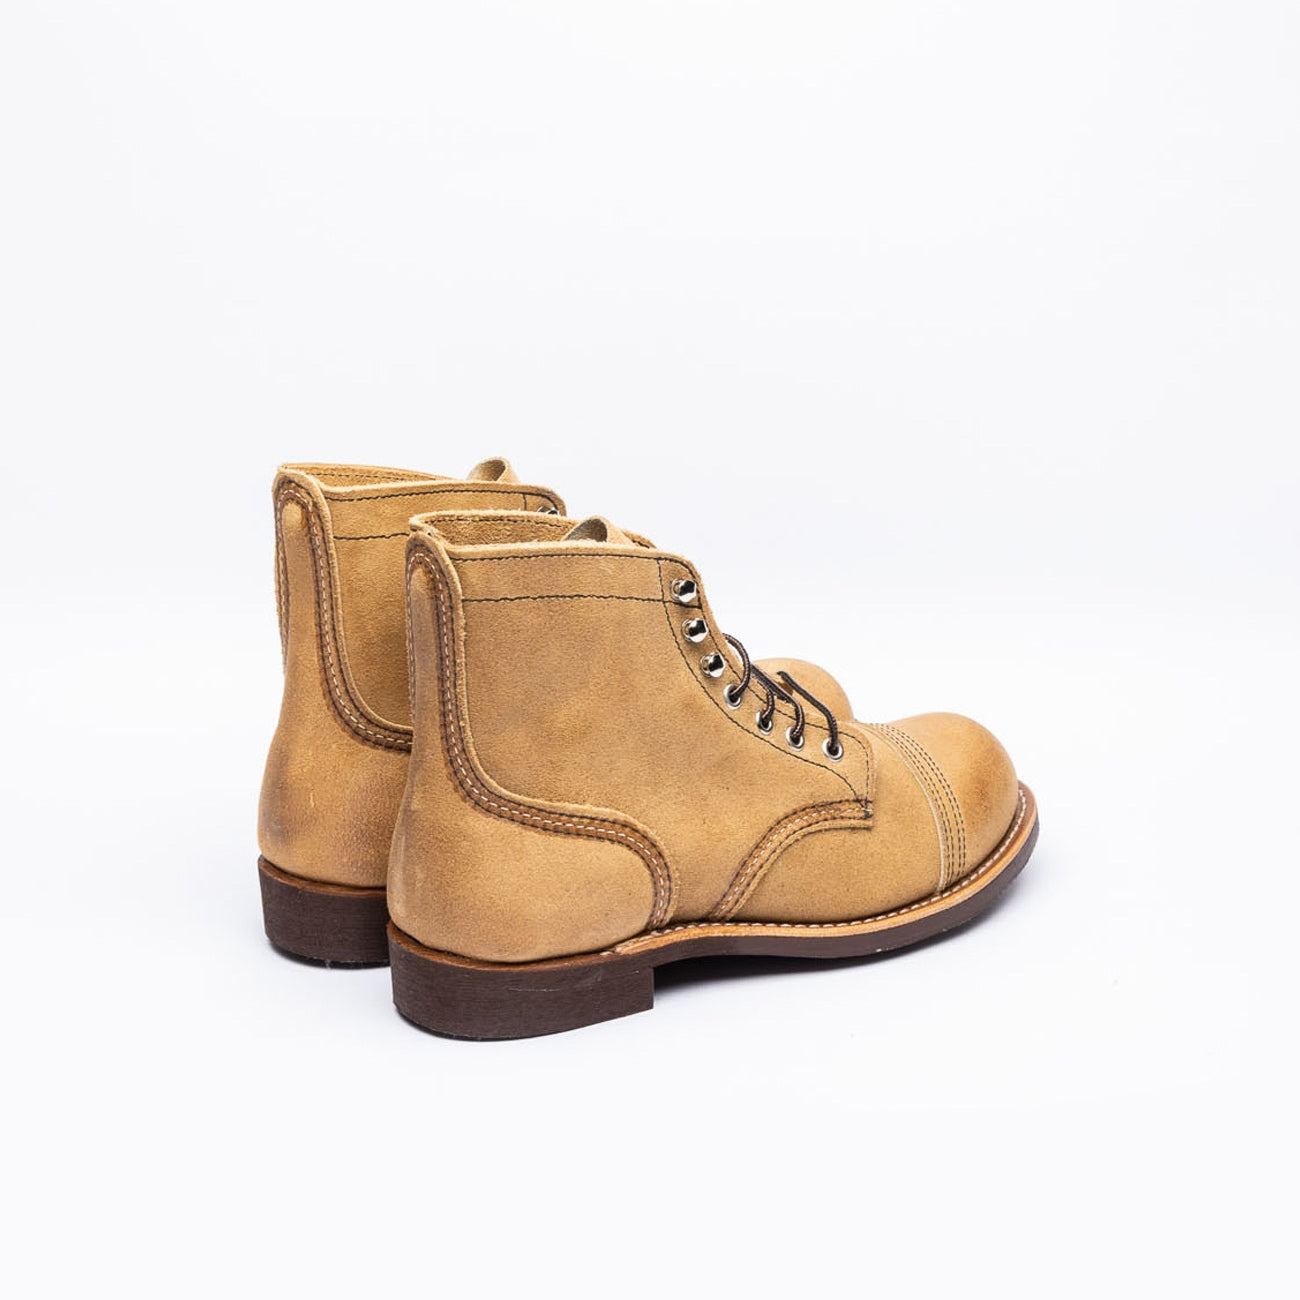 Polacco derby Red Wing Iron Ranger 8083 Hawthorne Mileskinner in camoscio sabbia